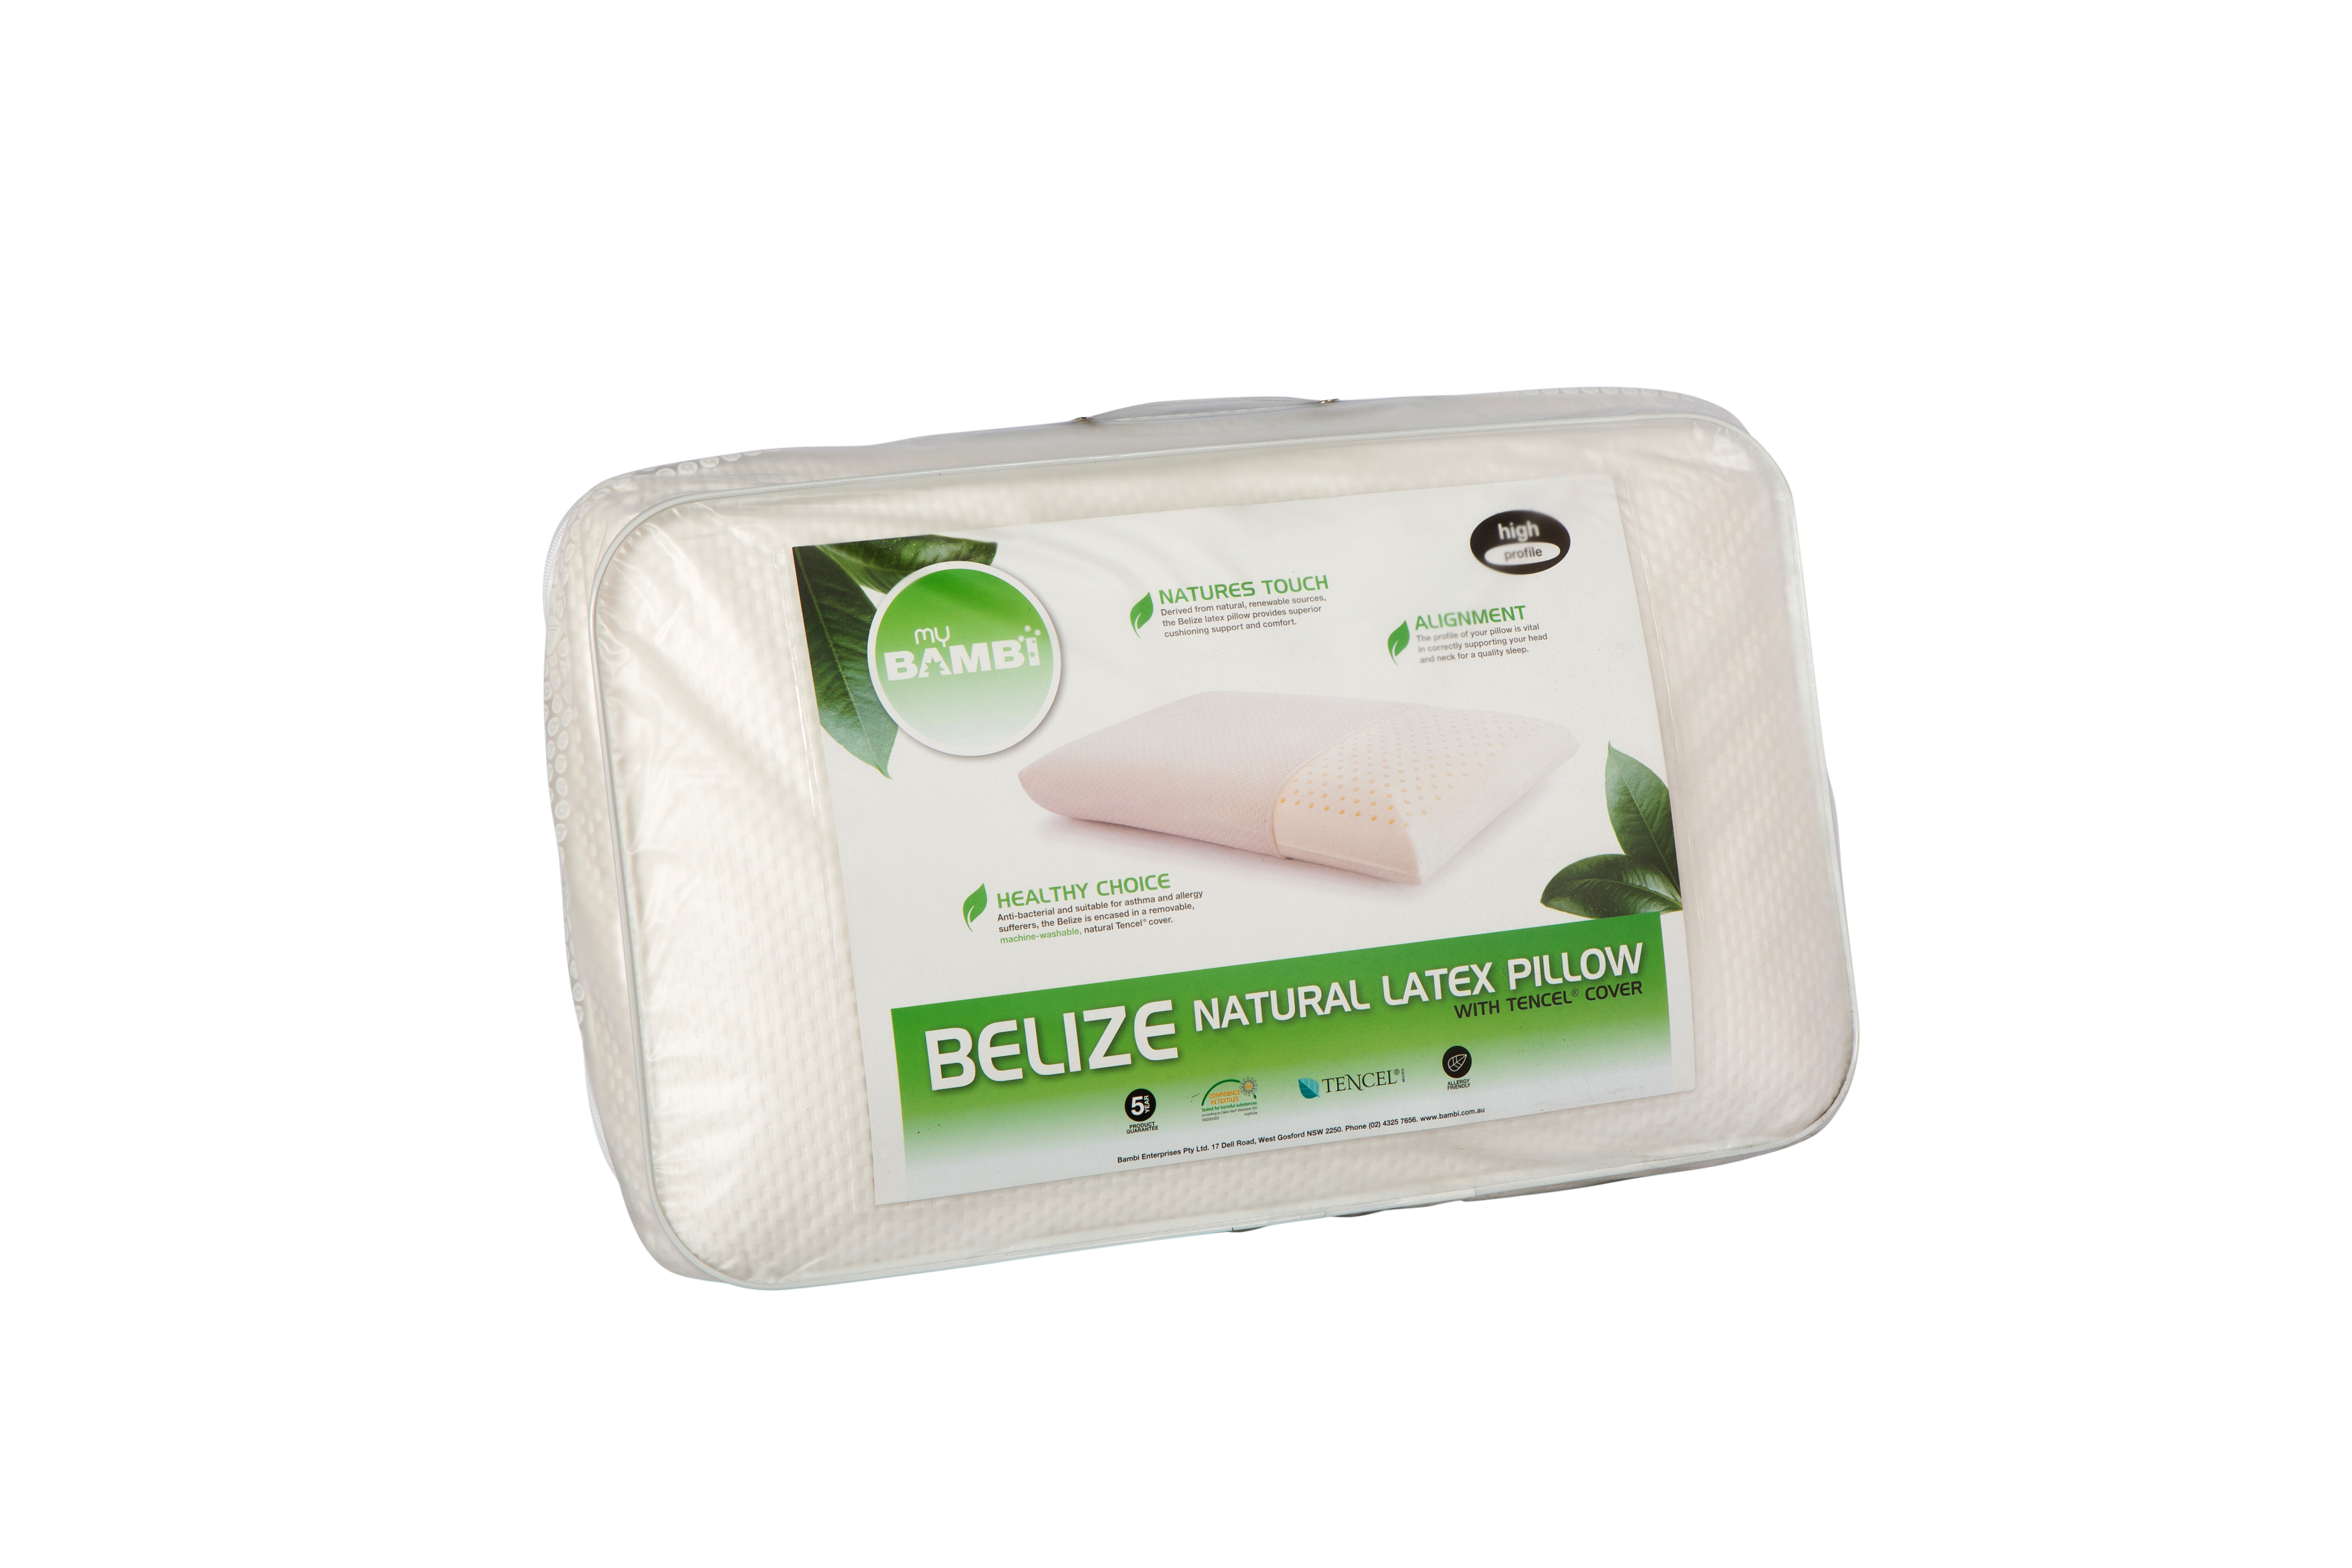 Belize Natural Latex High Profile Pillow with Tencel Cover